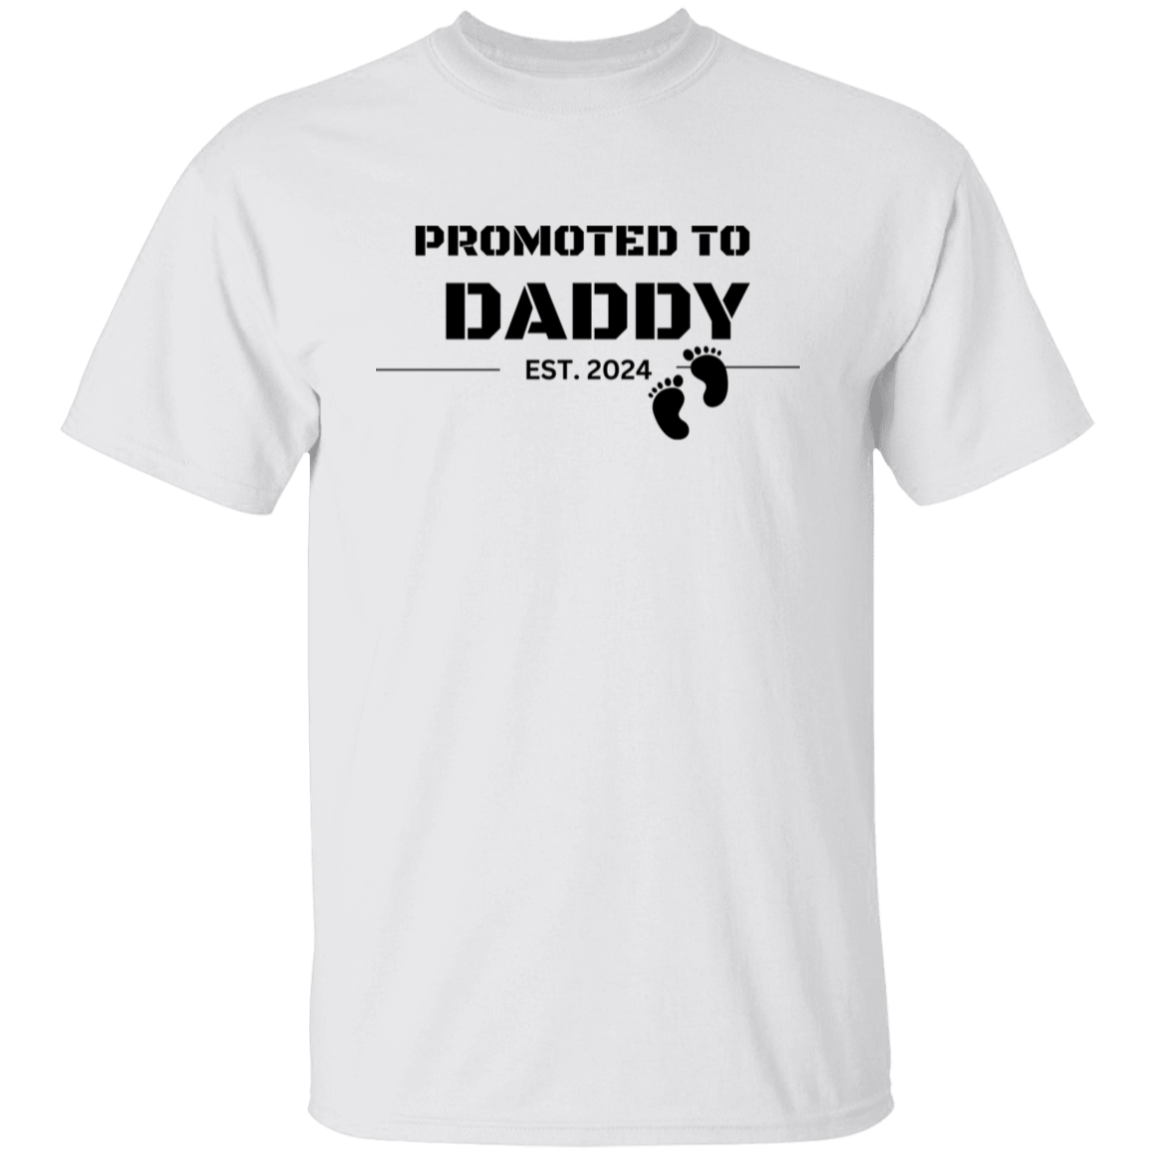 Promoted to Daddy  5.3 oz. T-Shirt